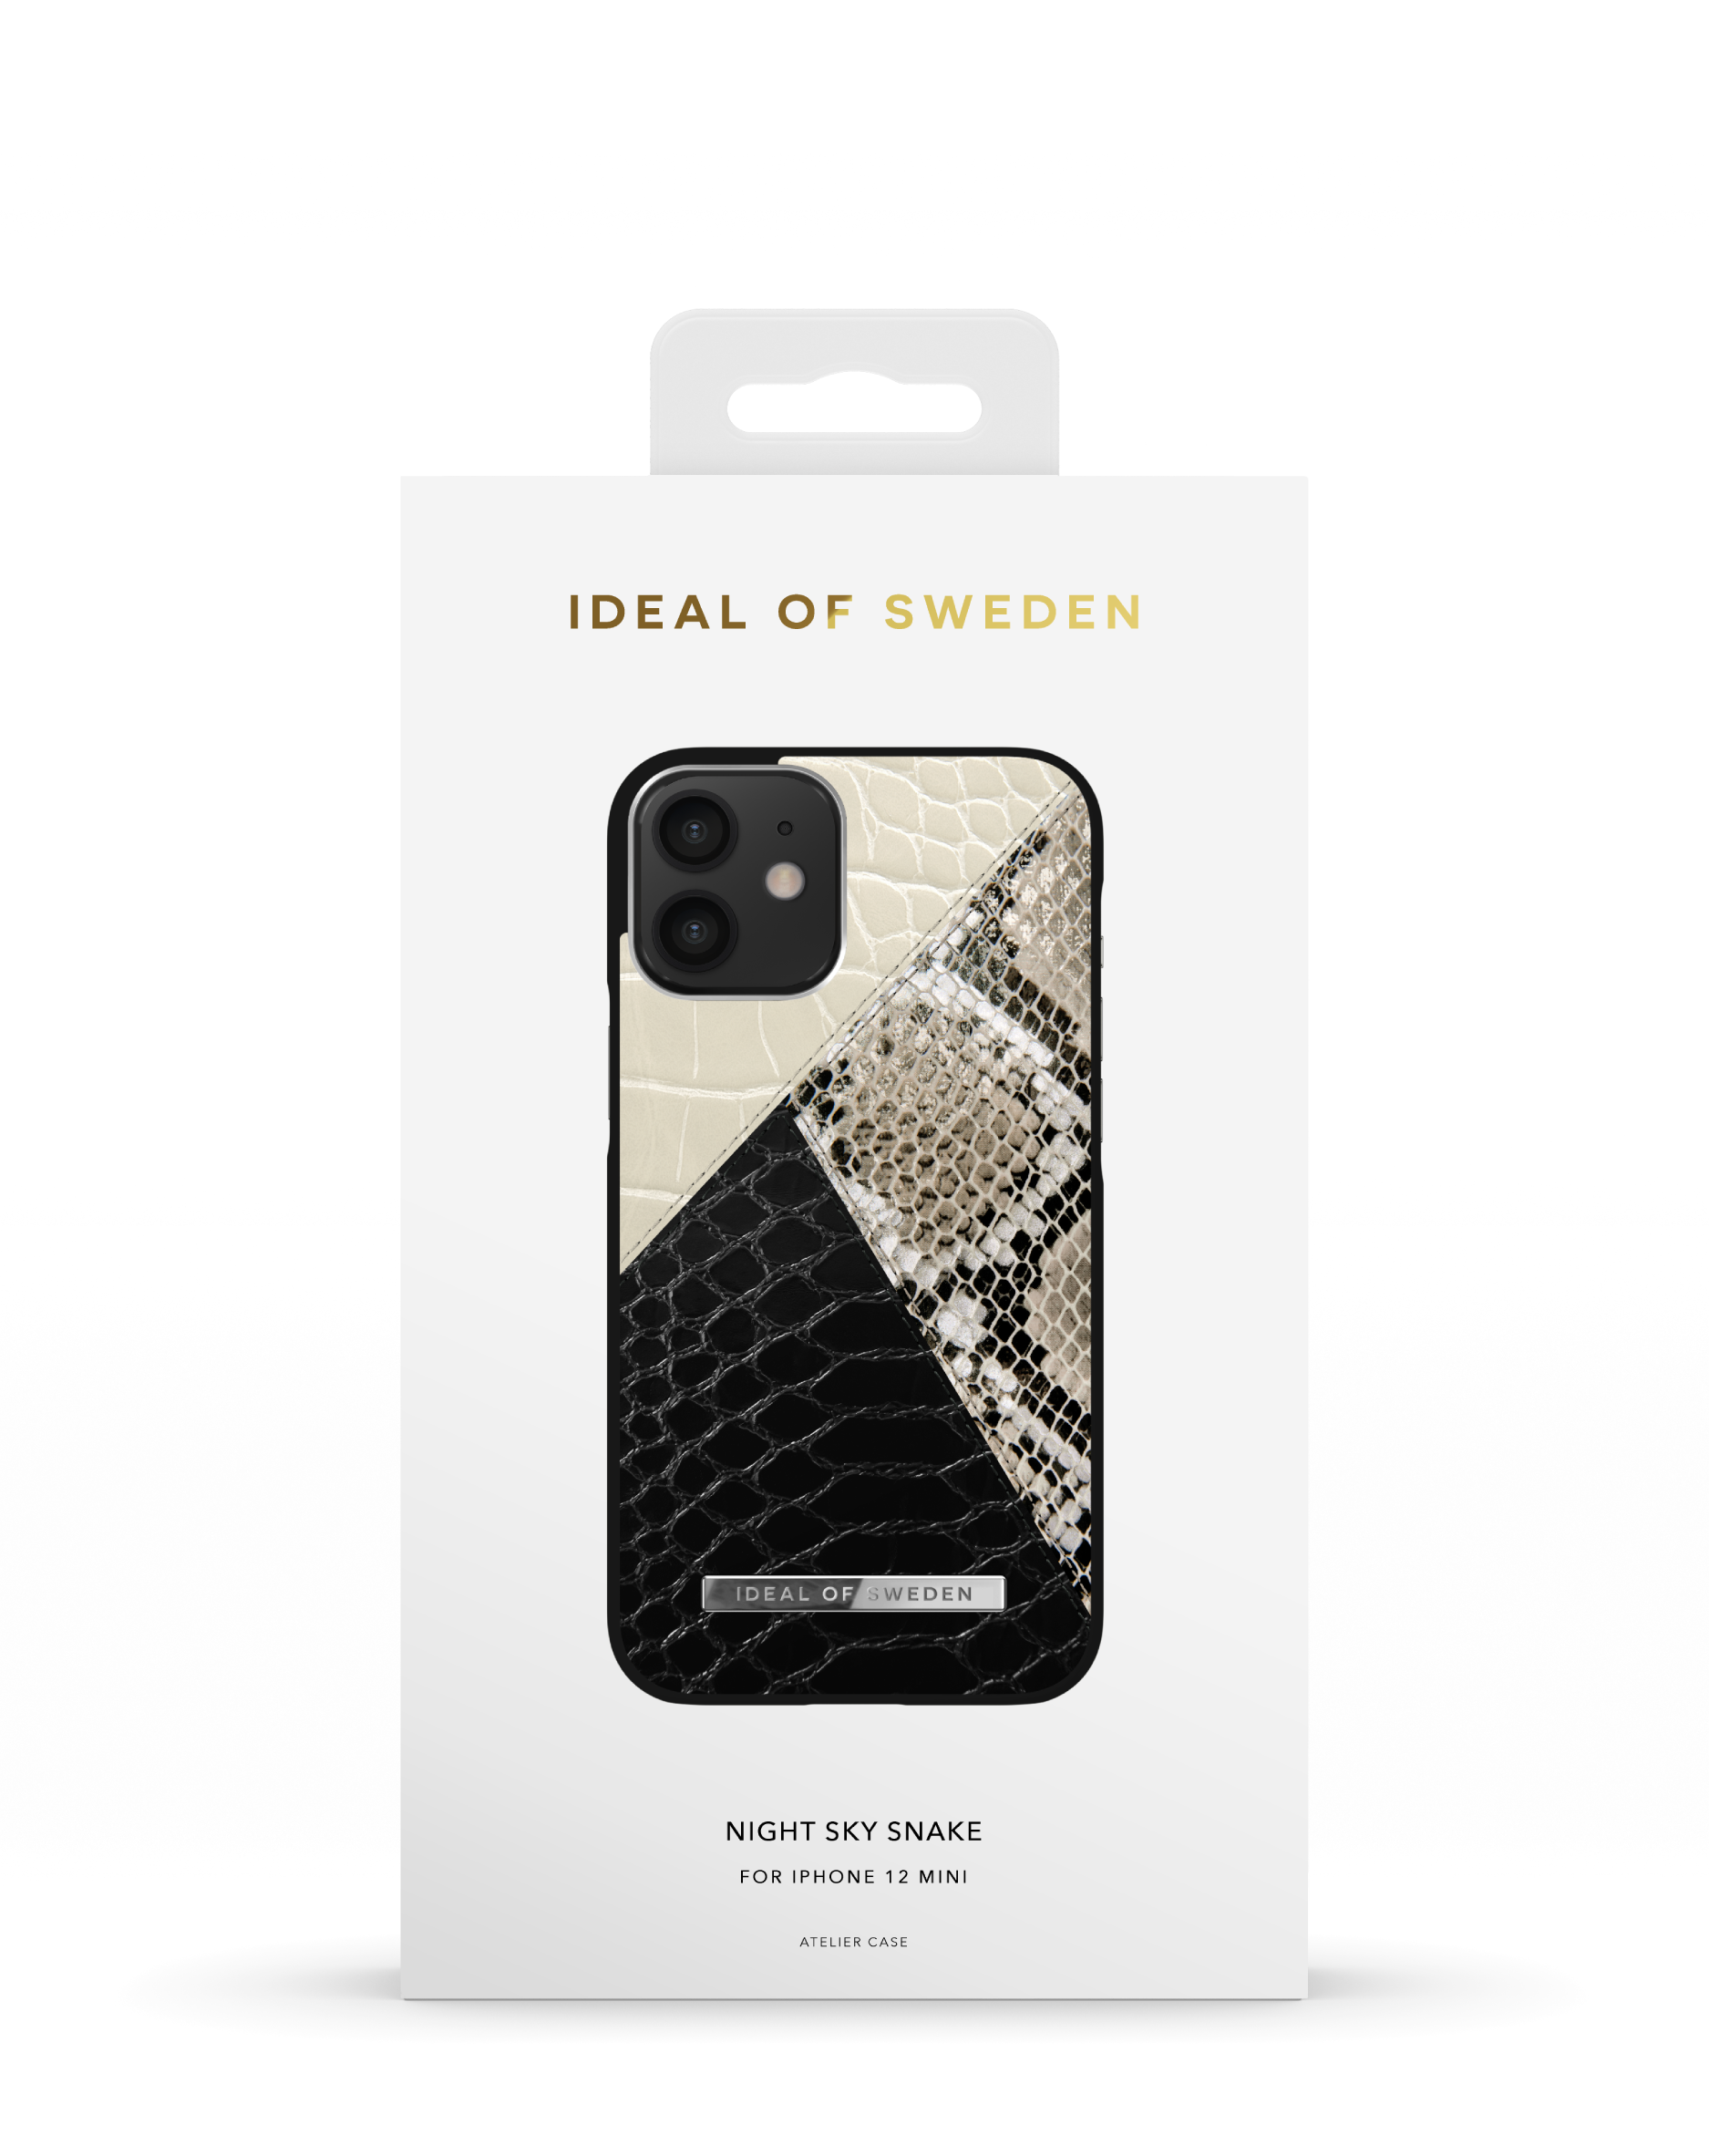 IDEAL OF IDACSS21-I2054-271, Backcover, SWEDEN Apple, mini, IPhone Night Snake 12 Sky